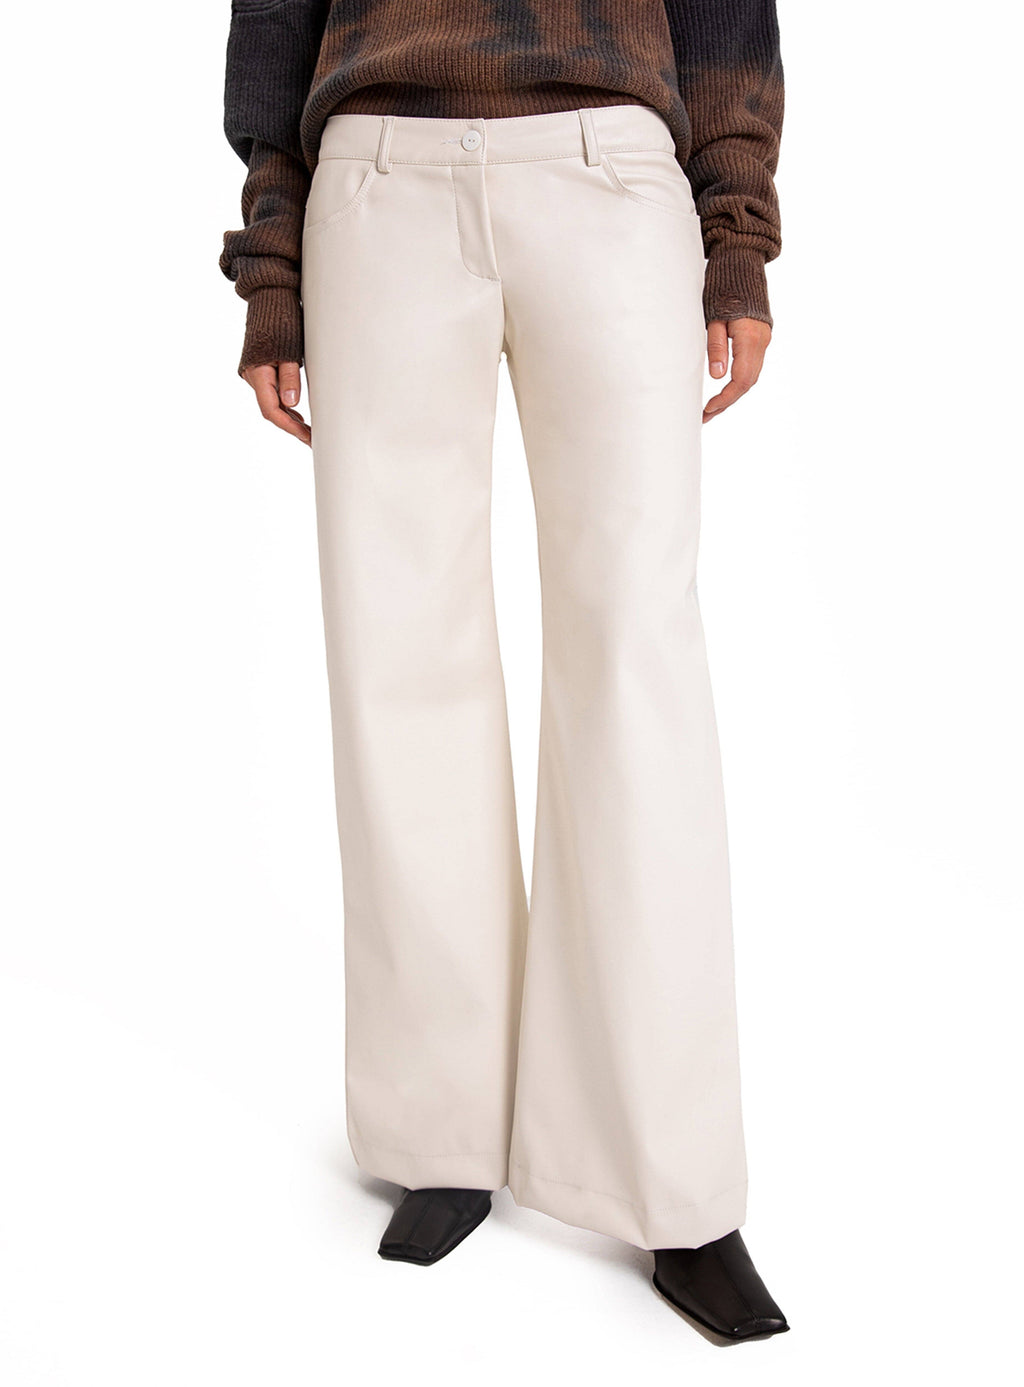 HARLOW WHITE FAUX LEATHER PANTS